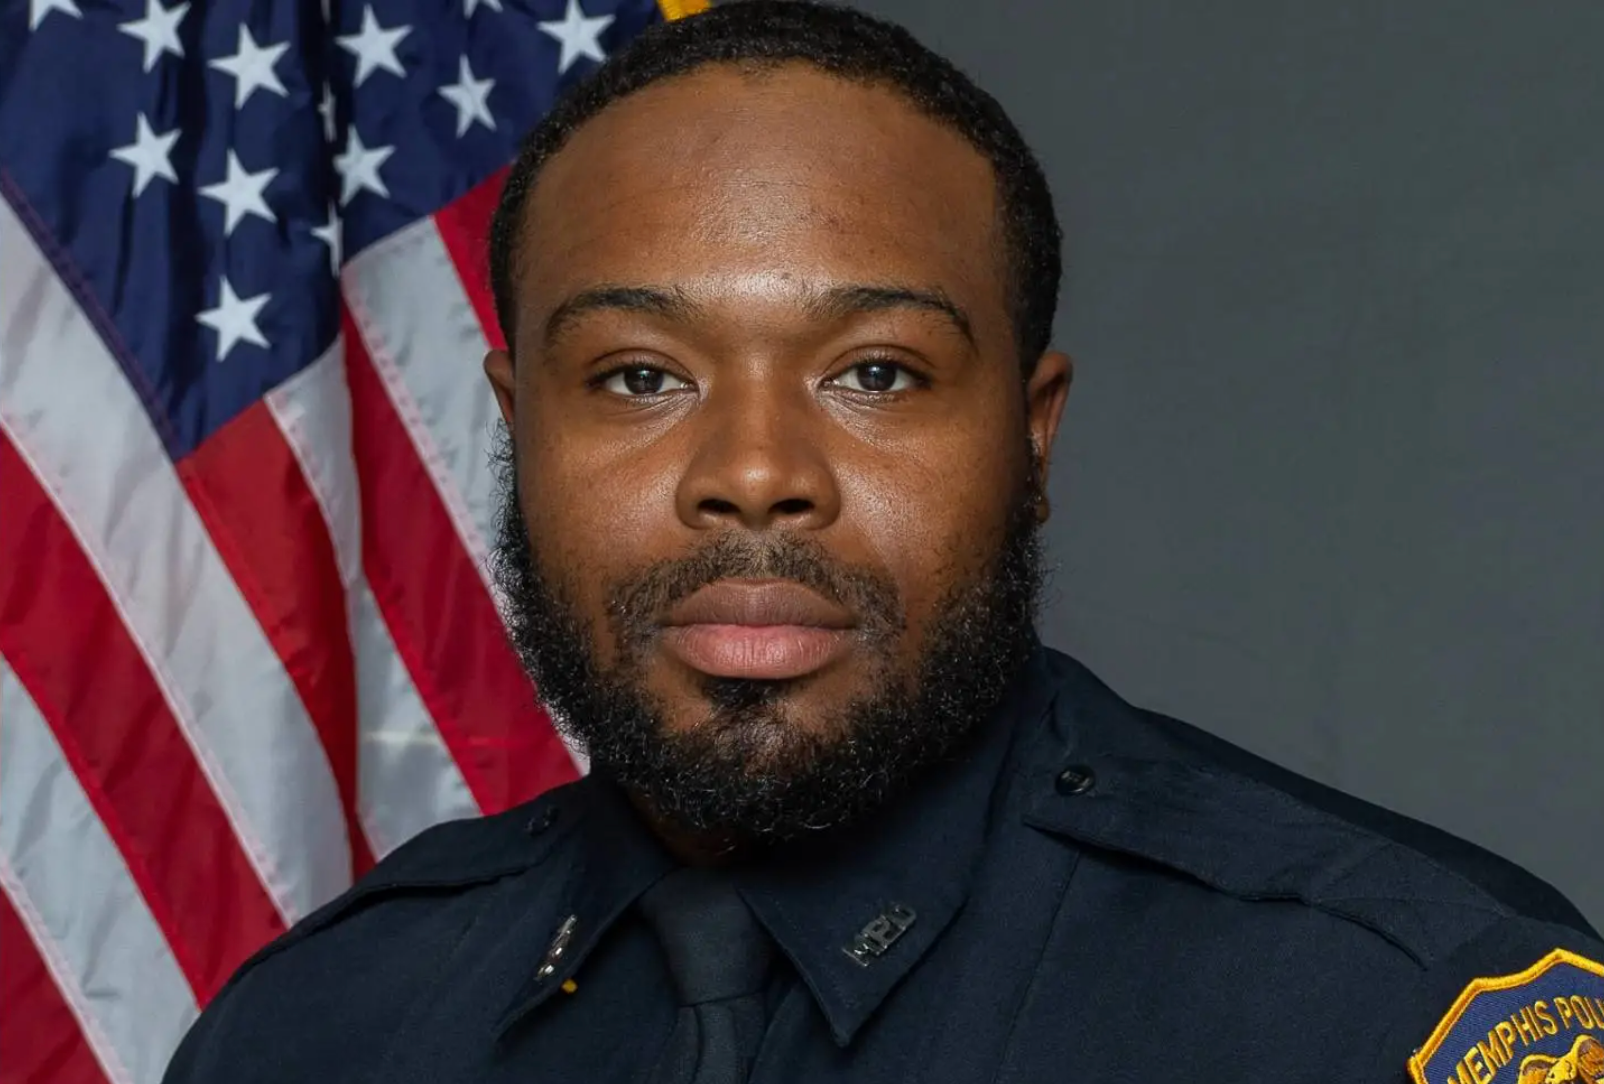 Fired Memphis Police Officer Texted Photo Of Tyre Nichols After Fatal Beating